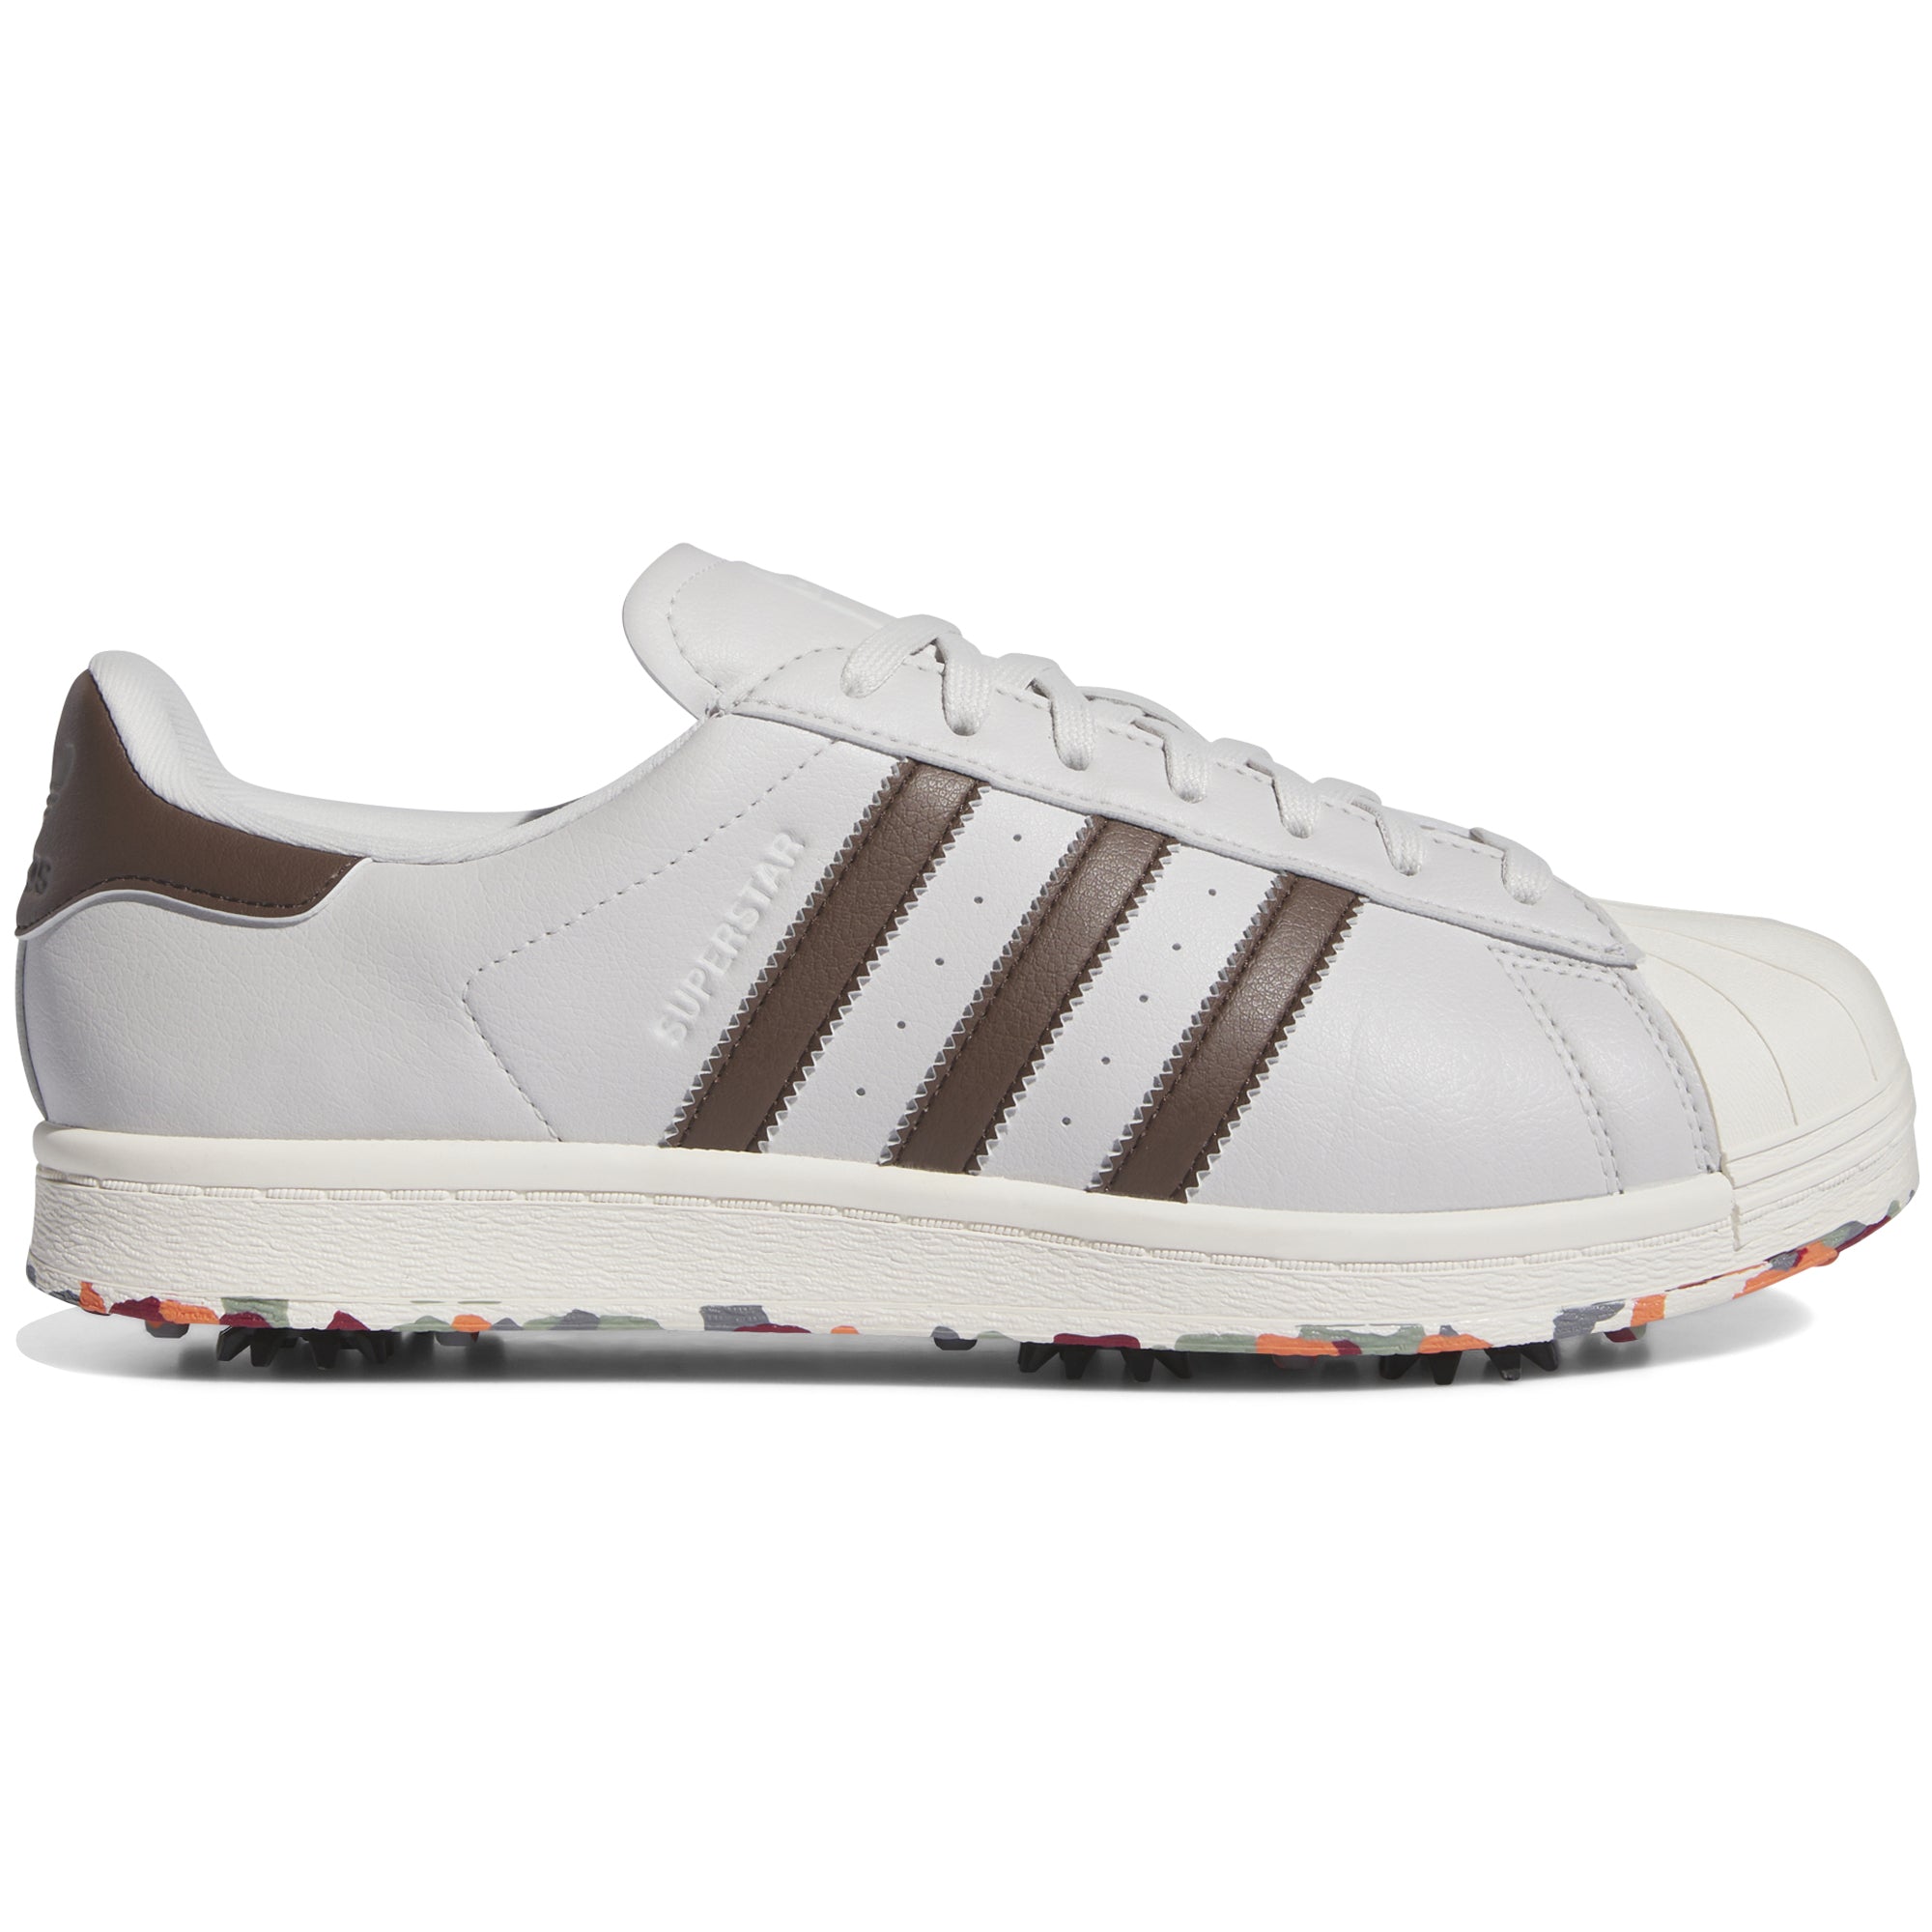 adidas-superstar-golf-shoes-id9298-grey-one-white